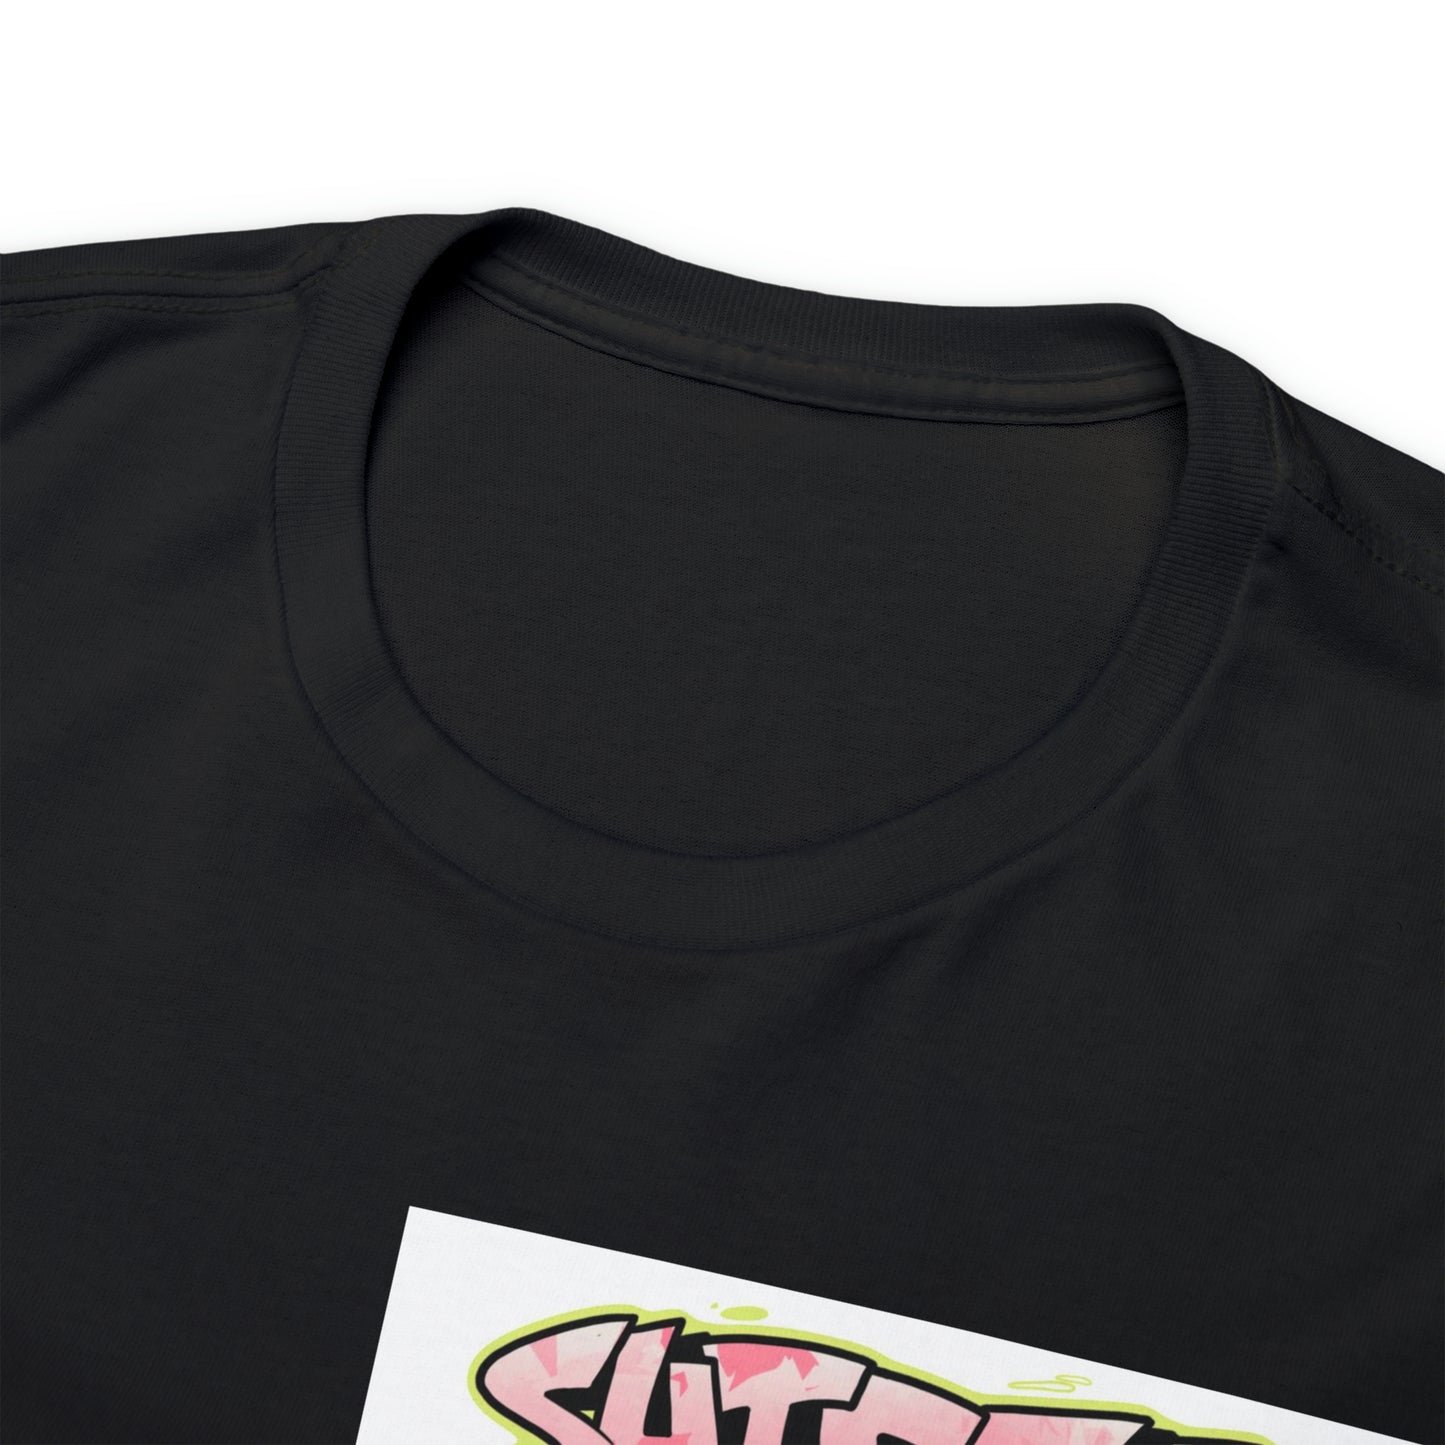 Official Shifty vandals tee(images switched)